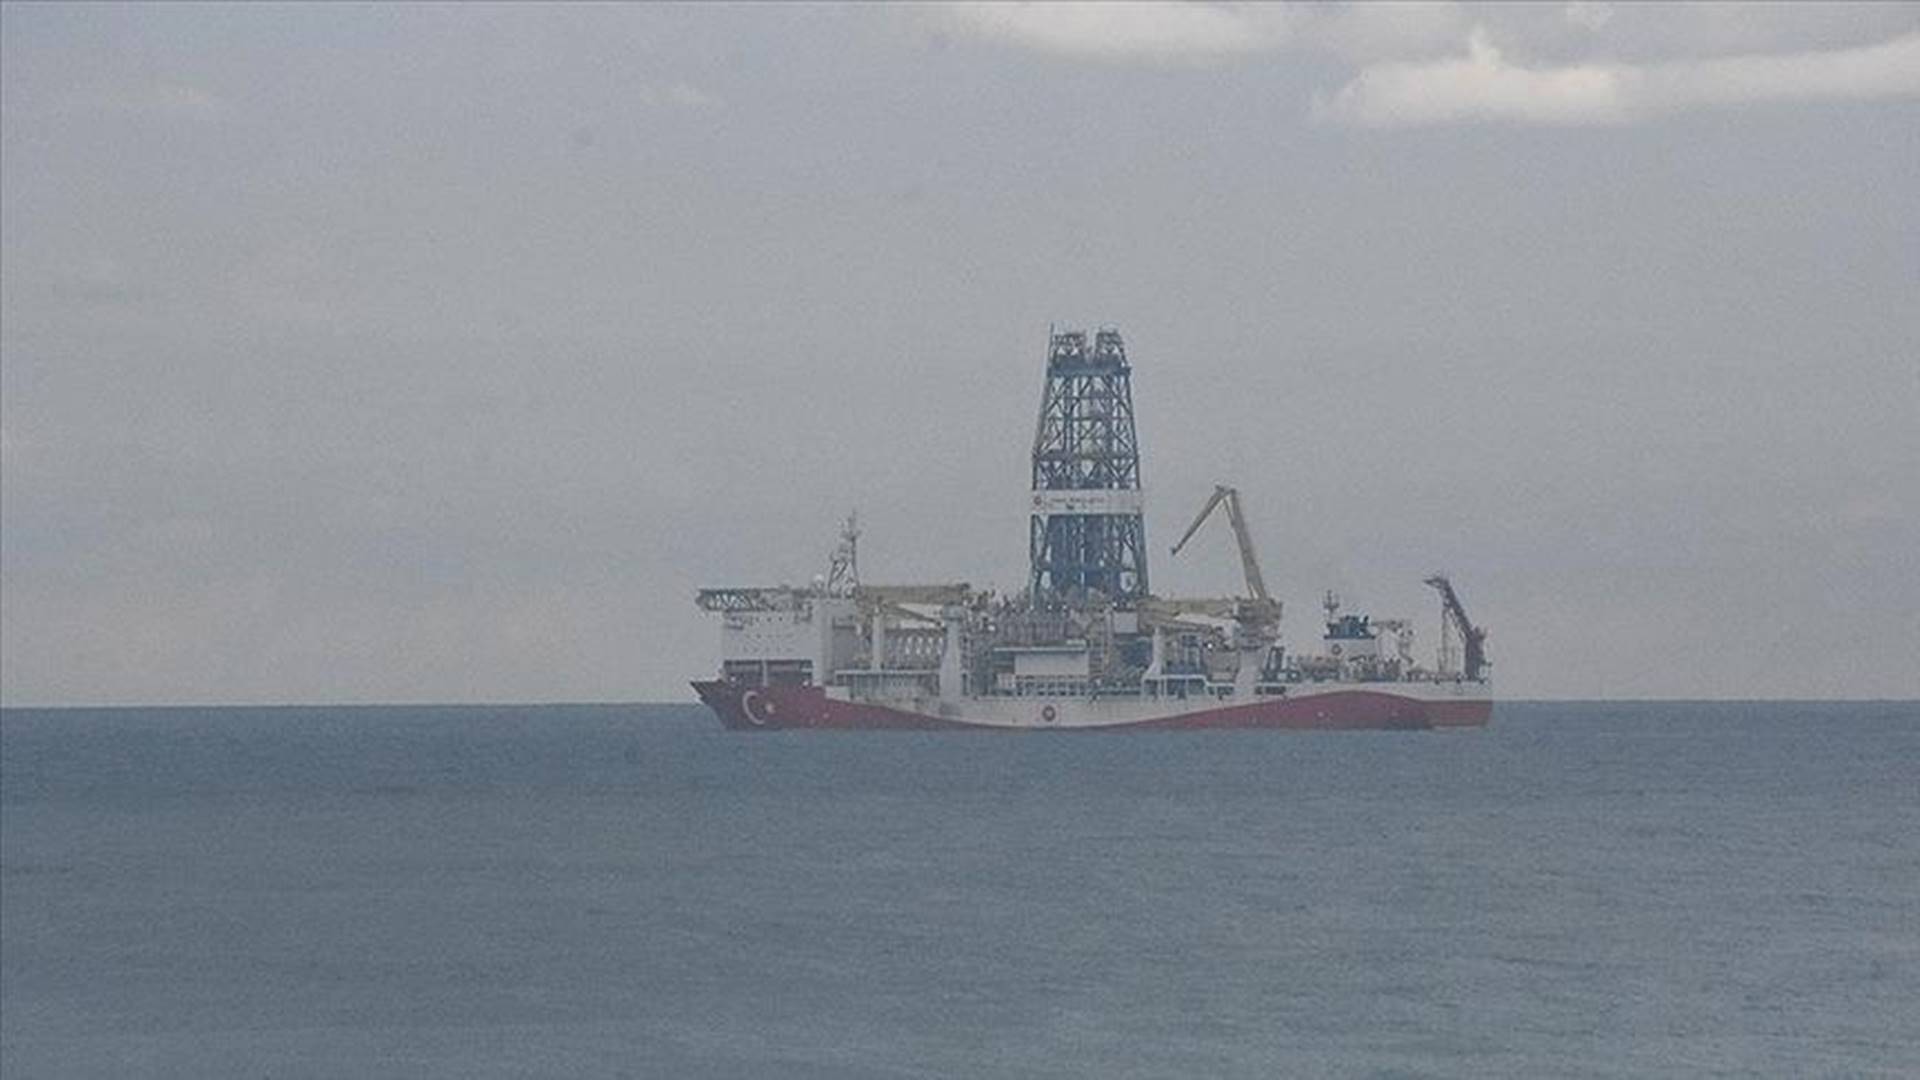 Turkey to open 'Black Sea Gas Contract' for future trade by Oct. 1